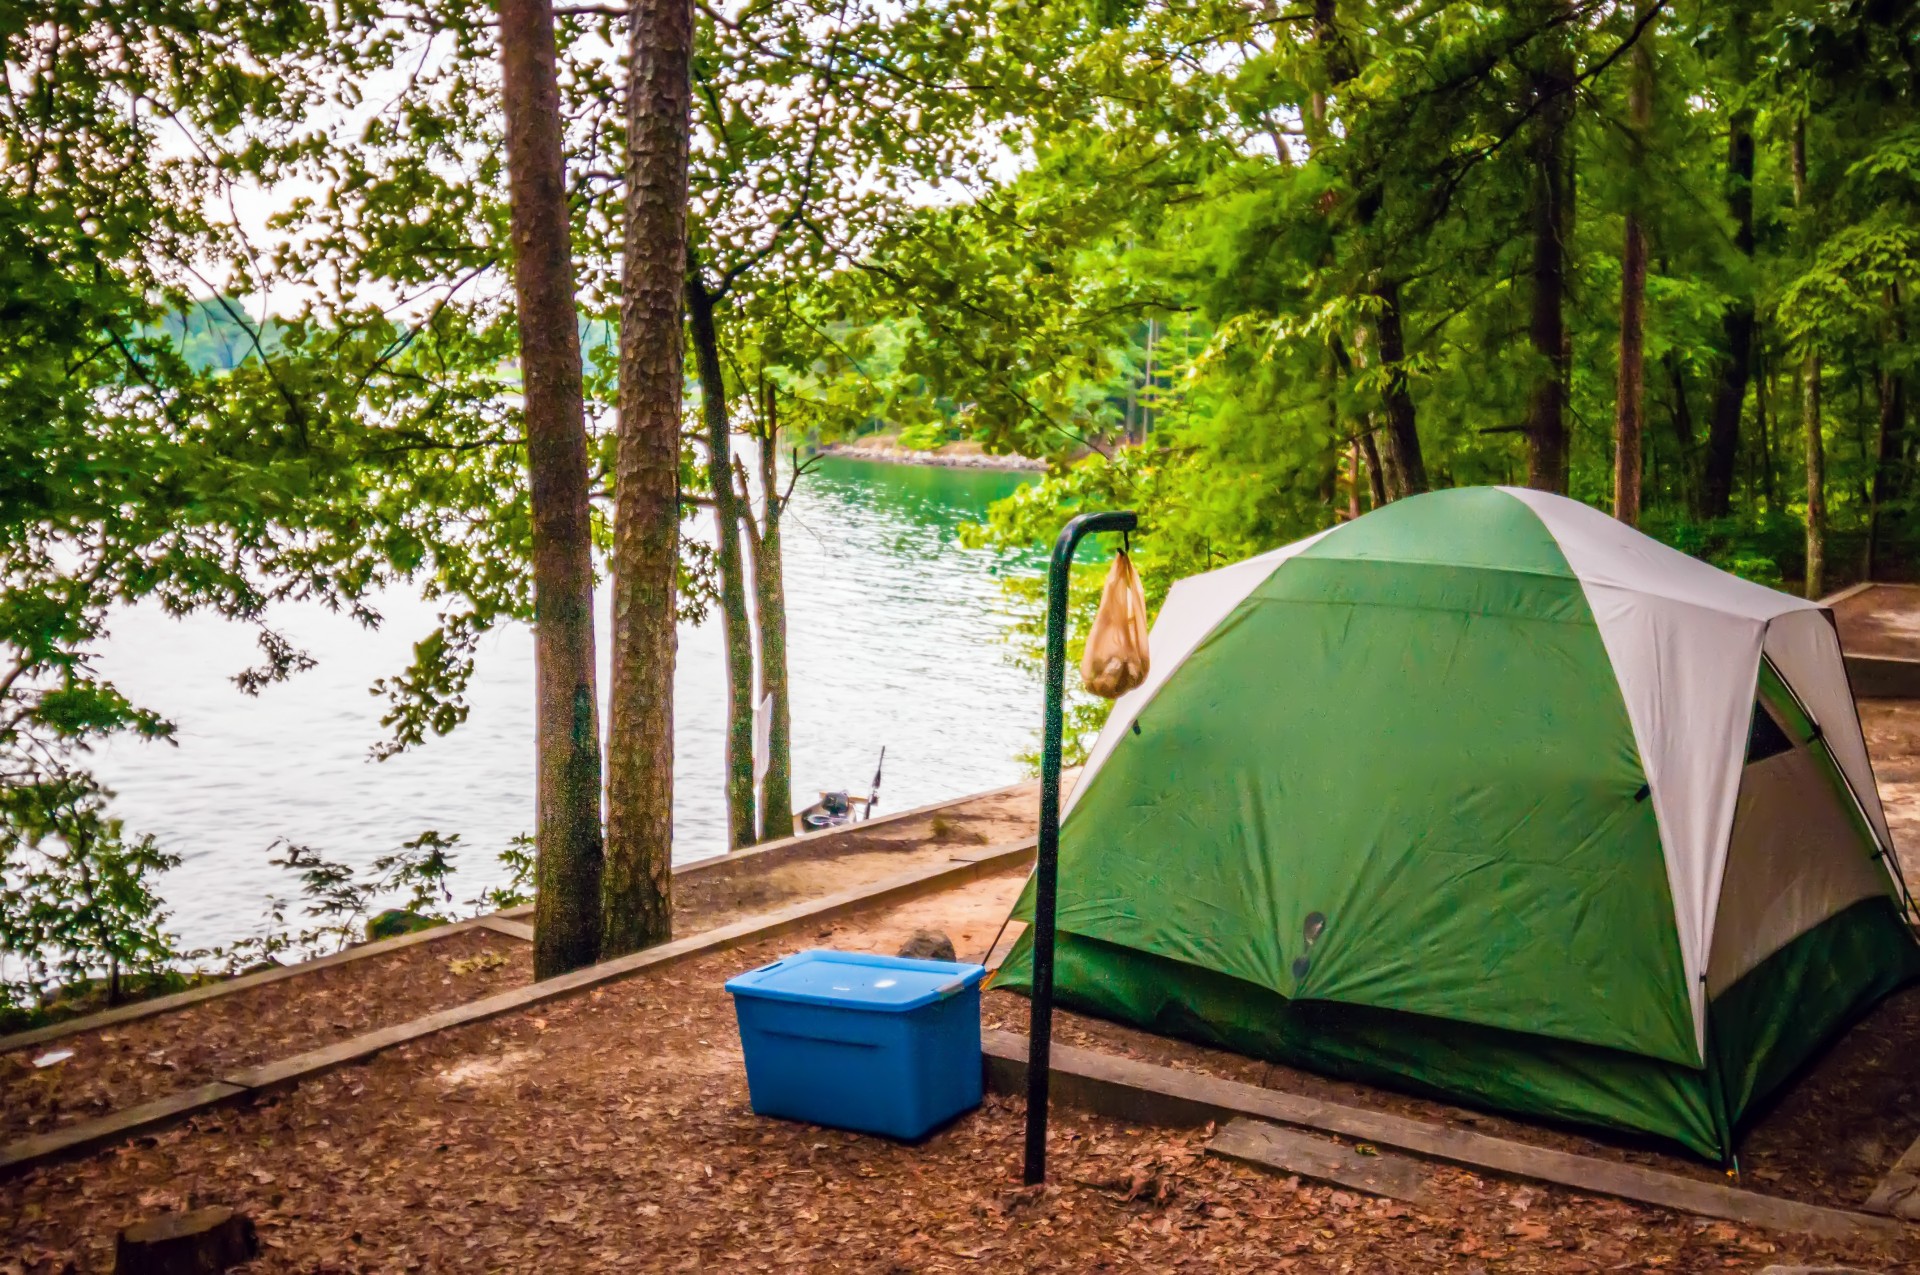 Tent By The Lake Free Stock Photo - Public Domain Pictures1920 x 1275